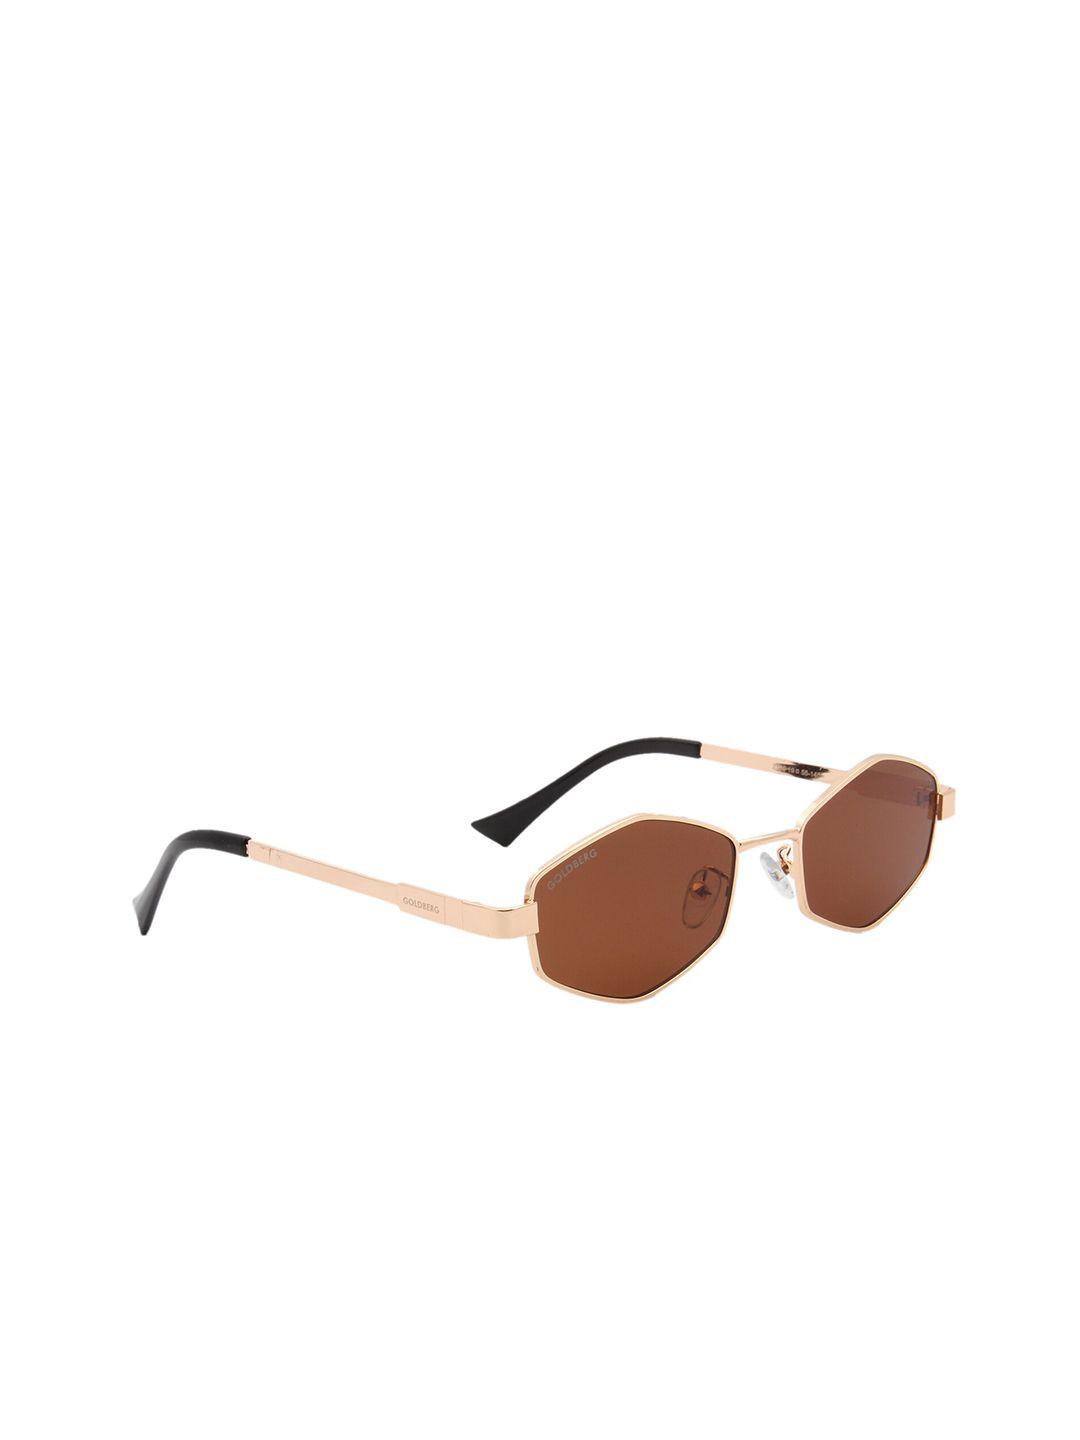 gold berg women brown & gold-toned sunglasses with uv protected lens gb-2189_brn